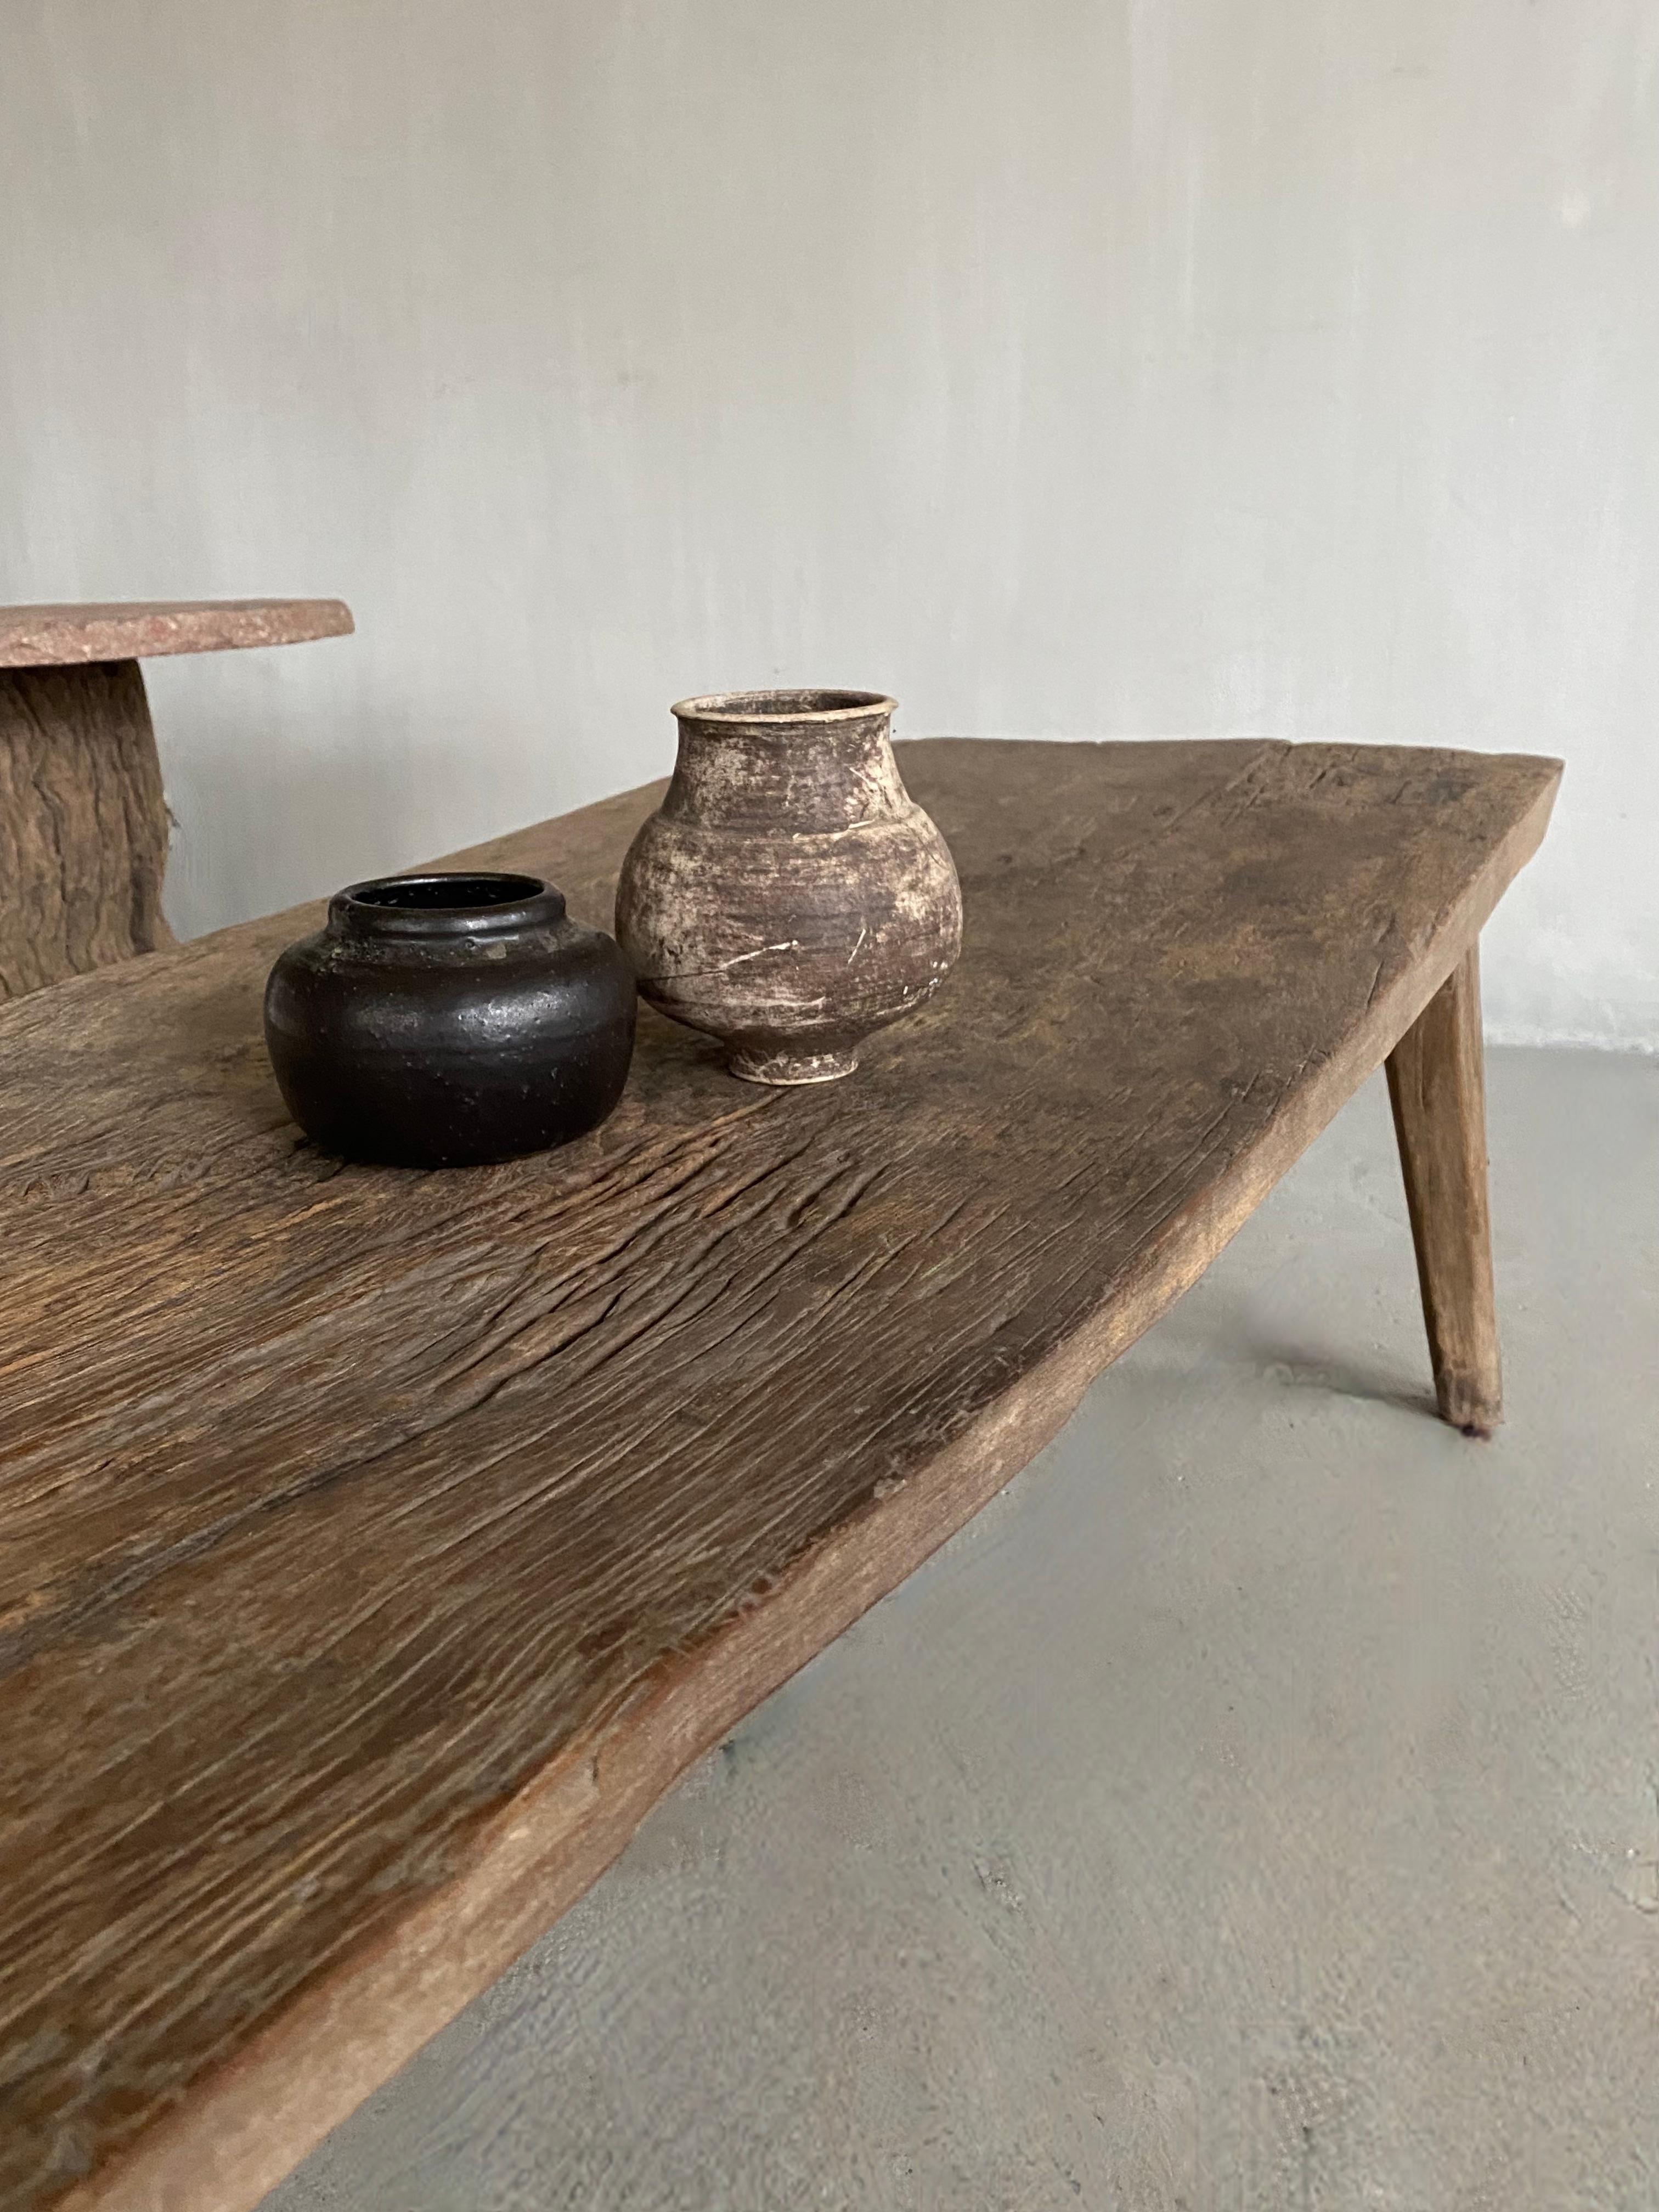 This beautiful unique piece can be used as a coffee table or as a wide bench.
It was a work table that was used to treat bread dough and acquired a lot of character through use.

The solid sculpted oak table is 41 cm high on the sides and 39 cm